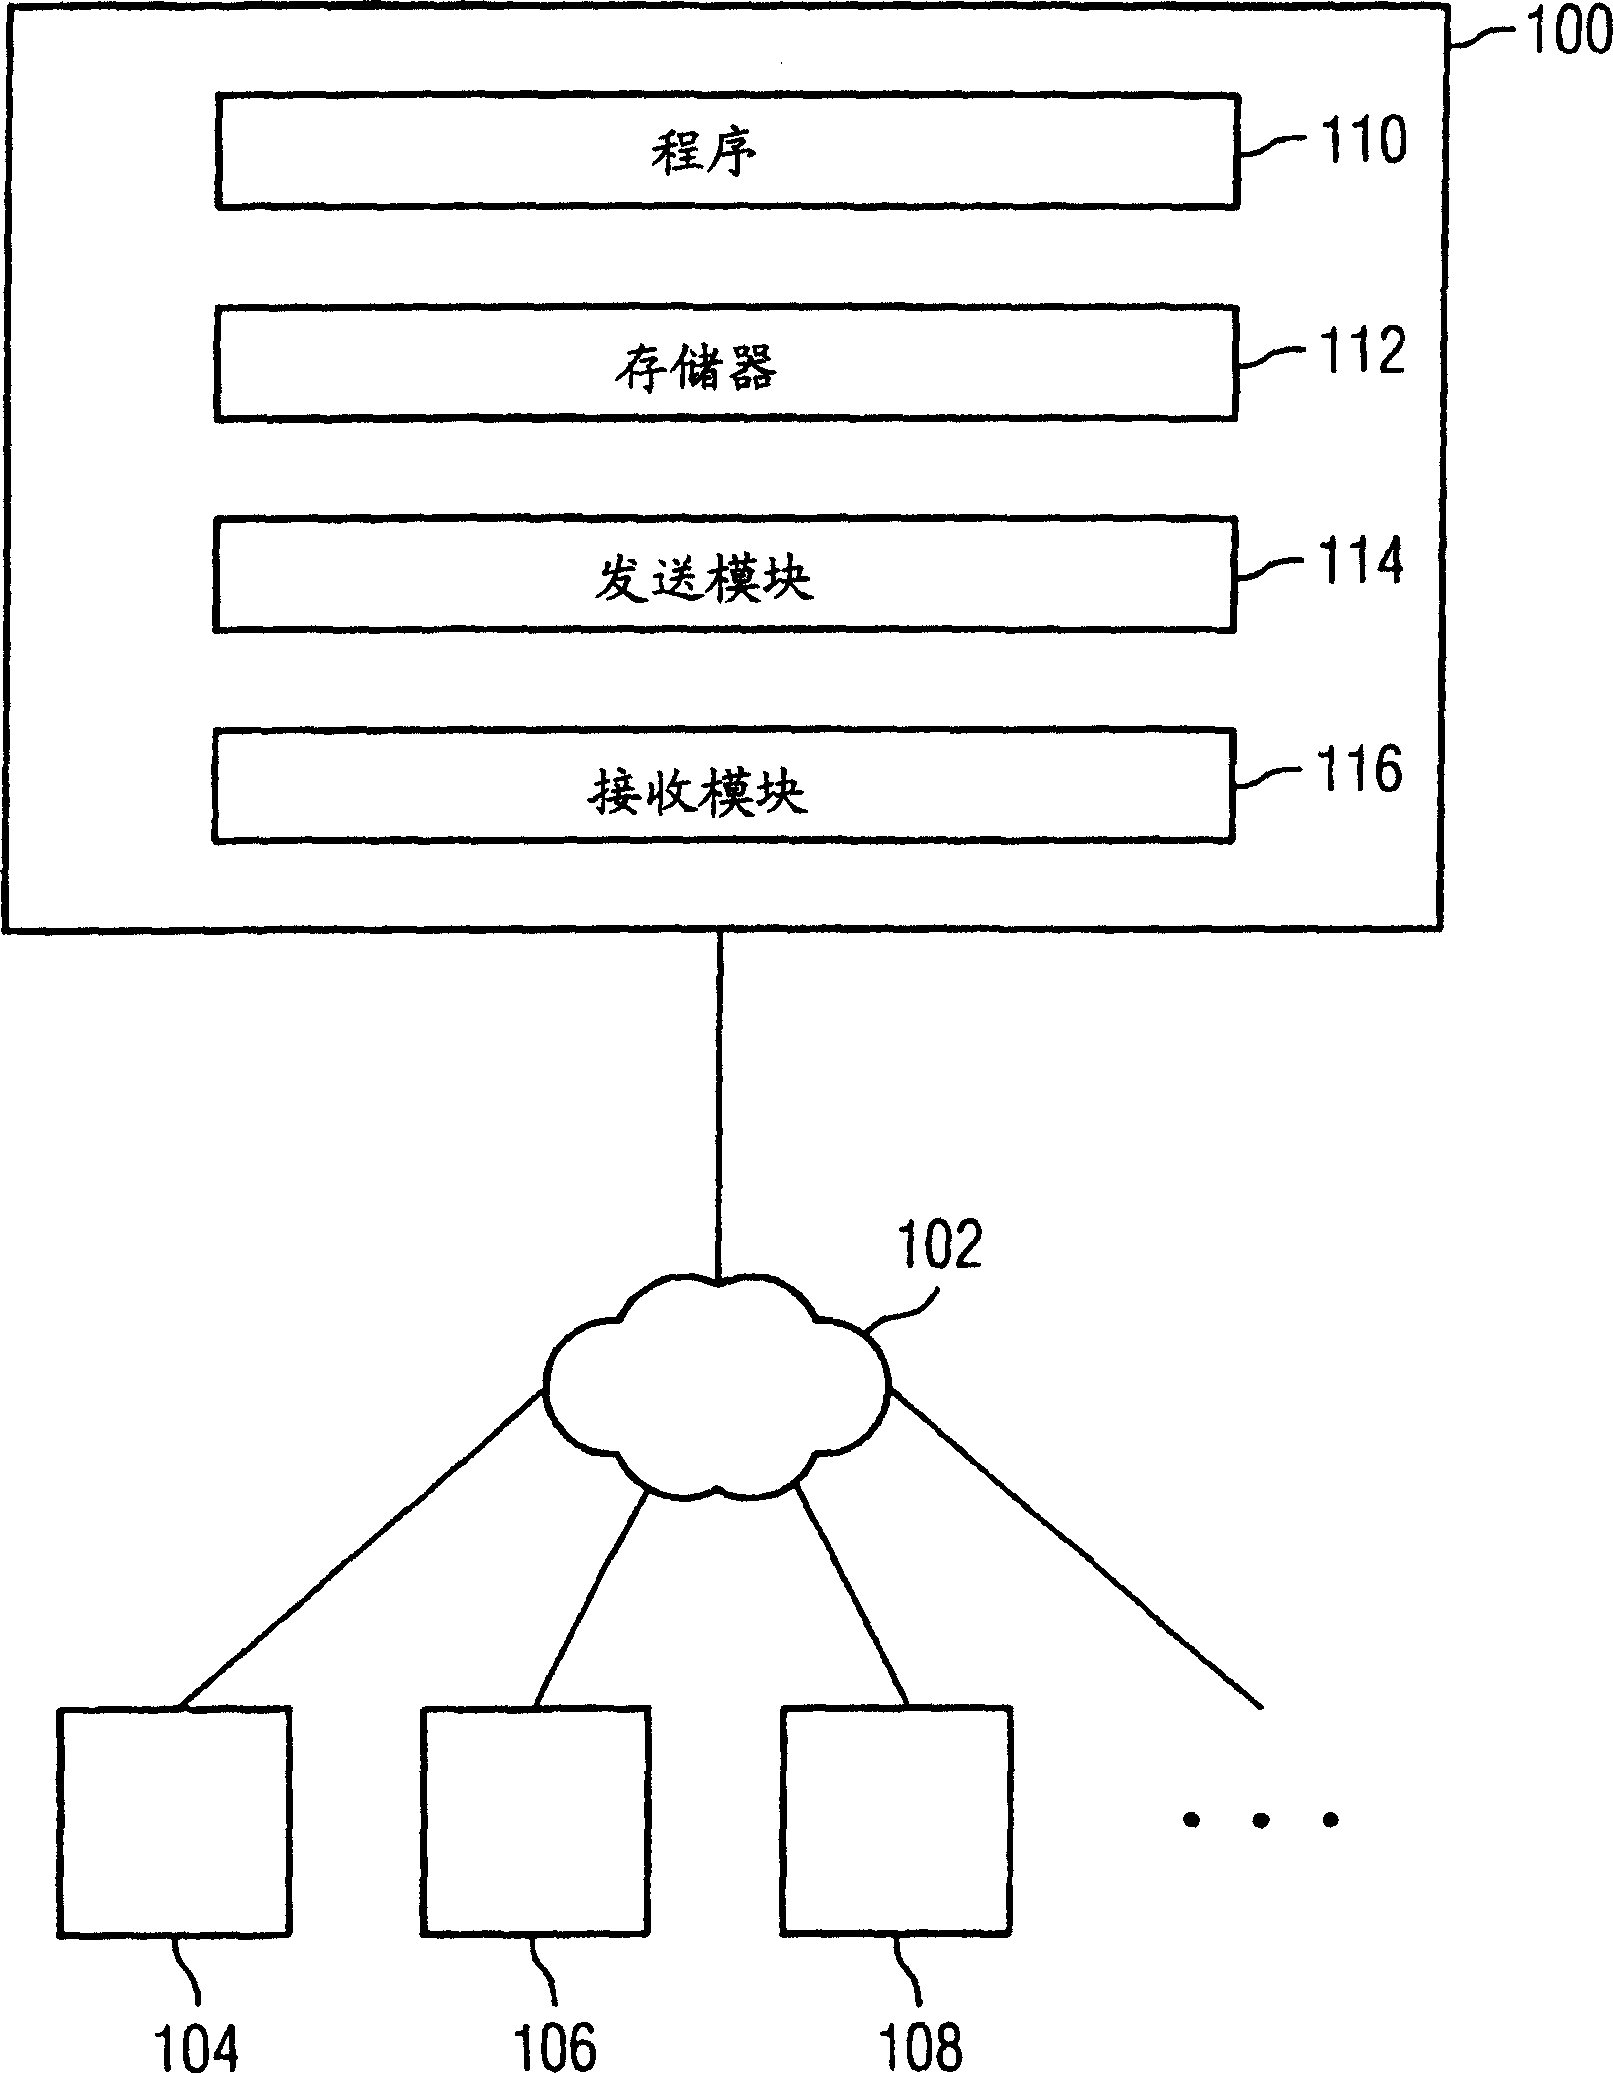 Subscriber device for a high-performance communication system